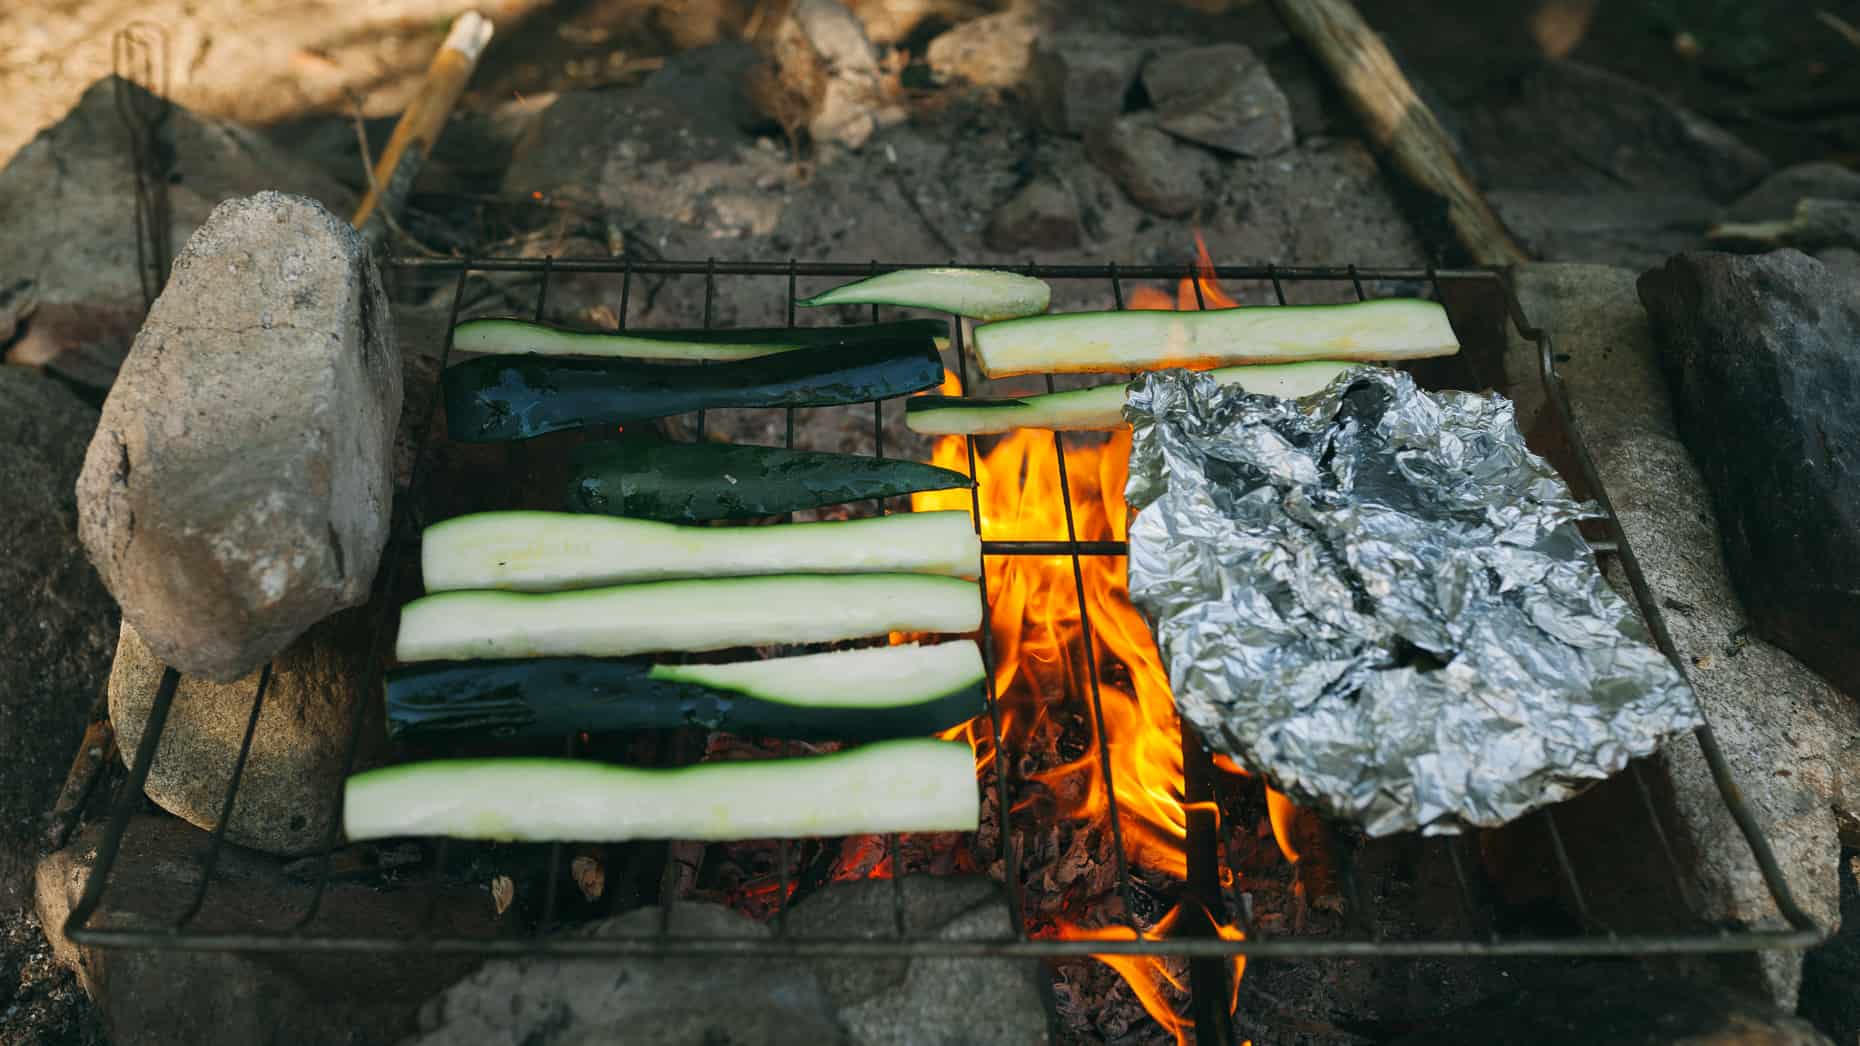 Zucchini cooking on the open fire.